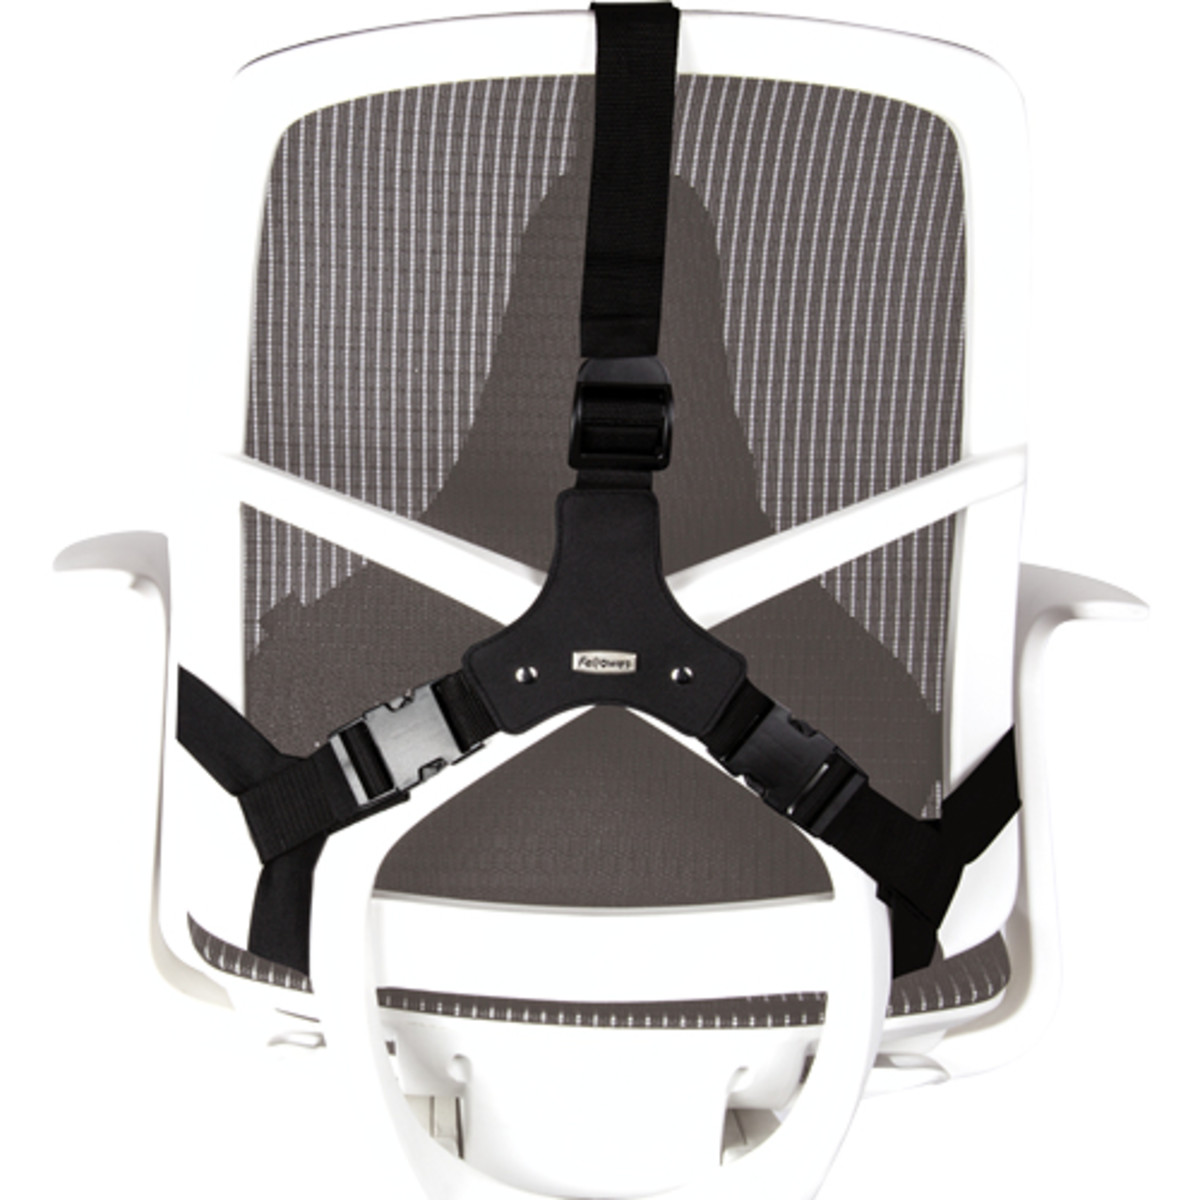 Pro Series Ultimate Back Support